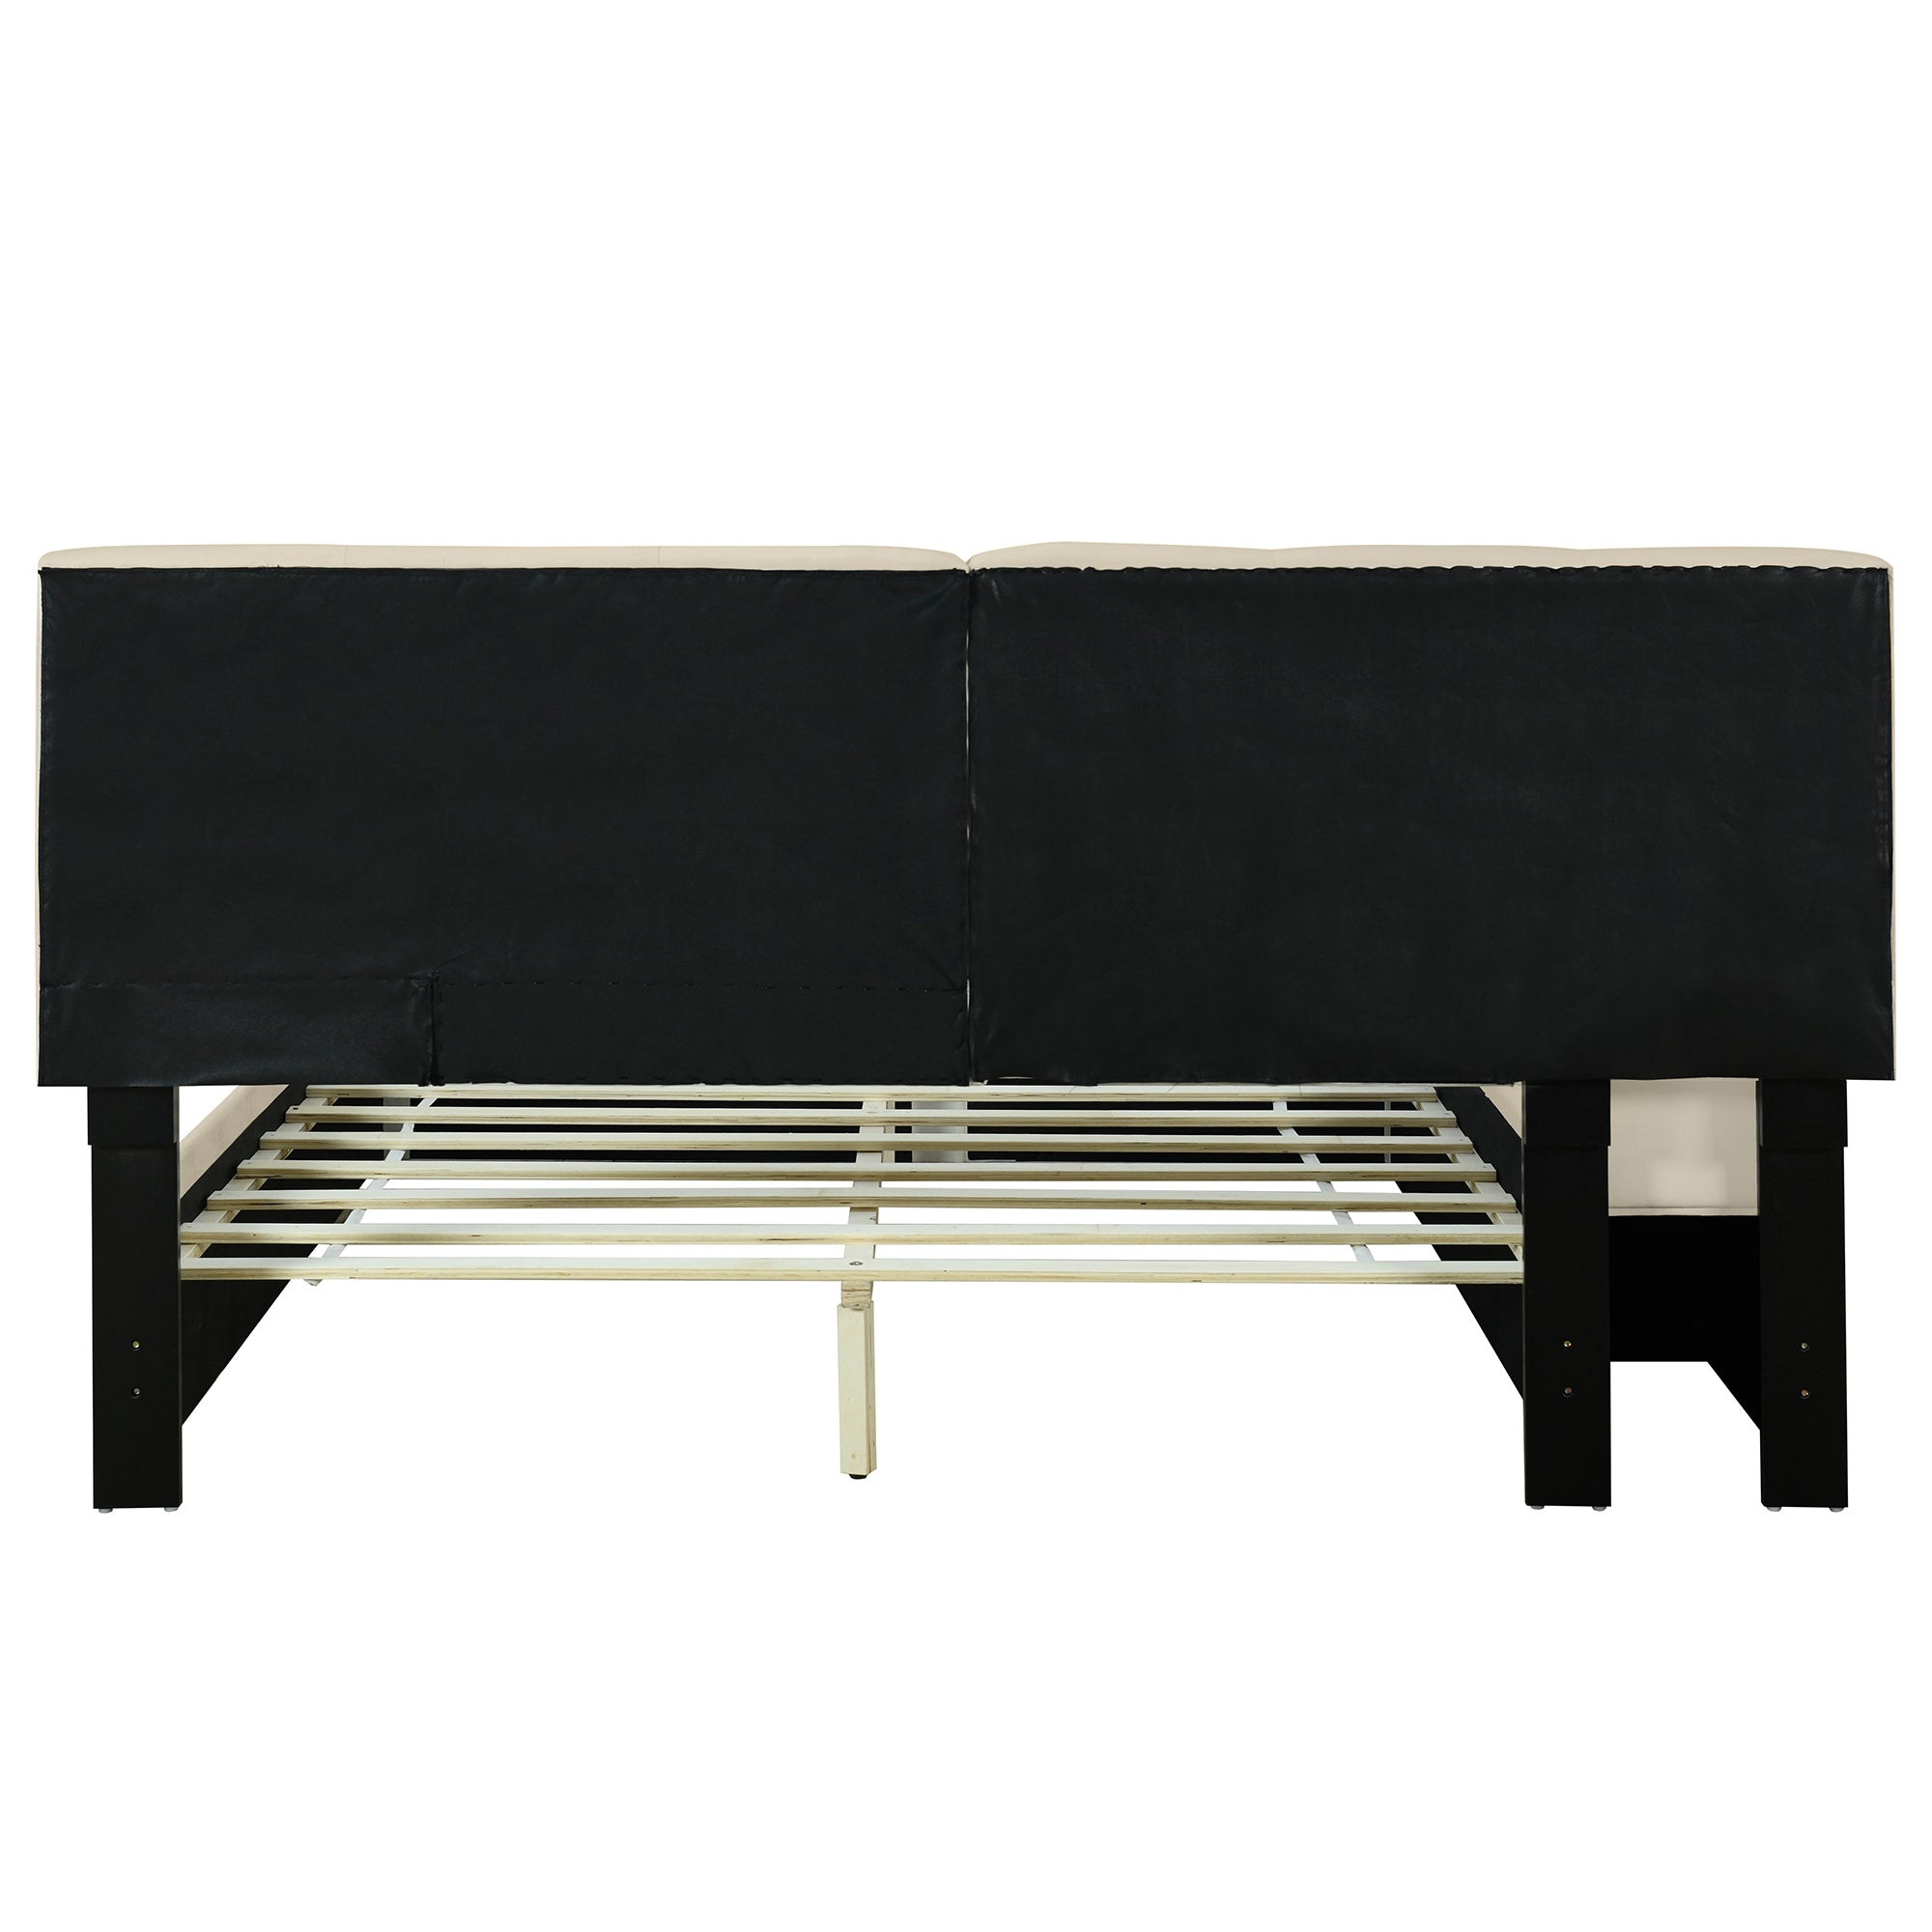 Queen Size Upholstered Platform Bed with Lateral beige-velvet